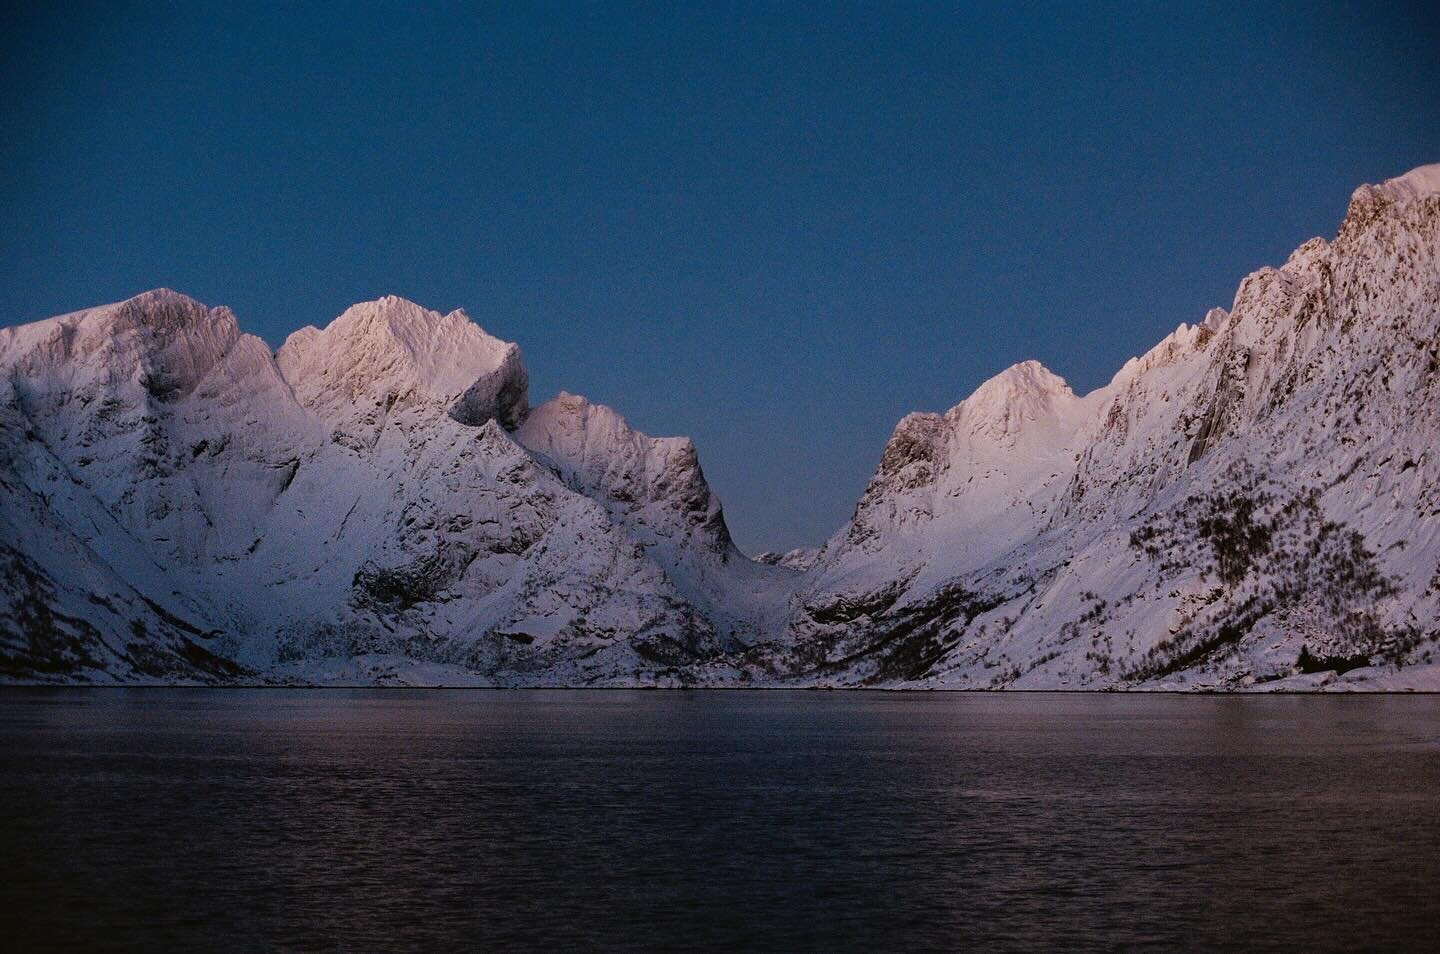 Blue hour in #Norway on #portra400.